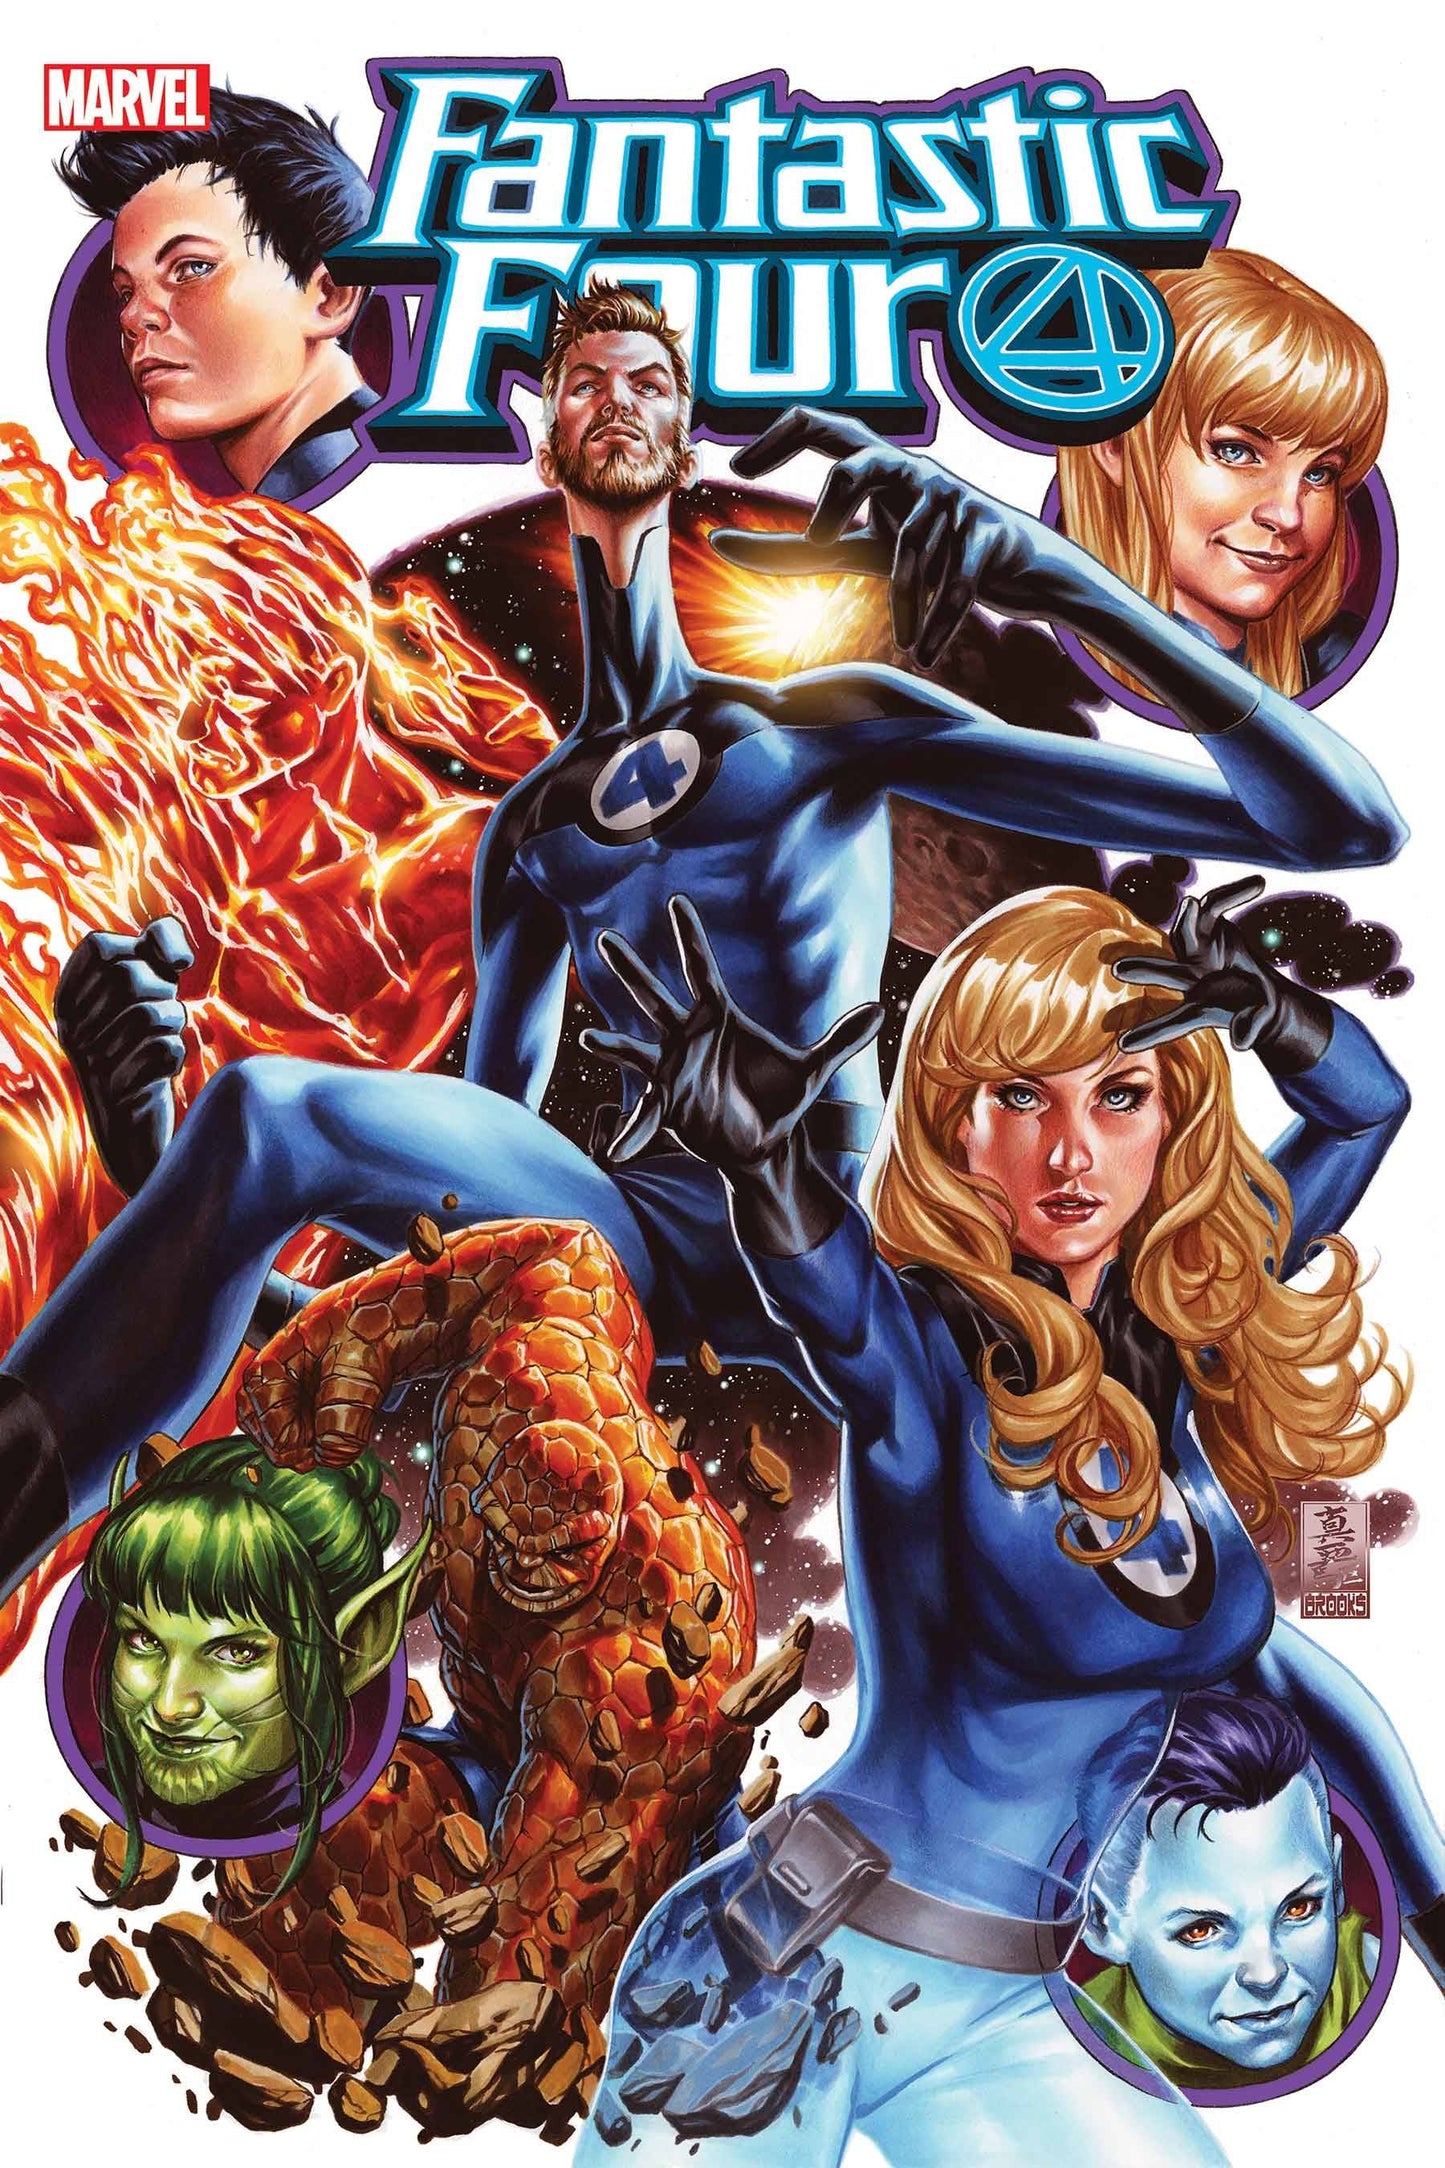 FANTASTIC FOUR #25 BY MARK BROOKS POSTER